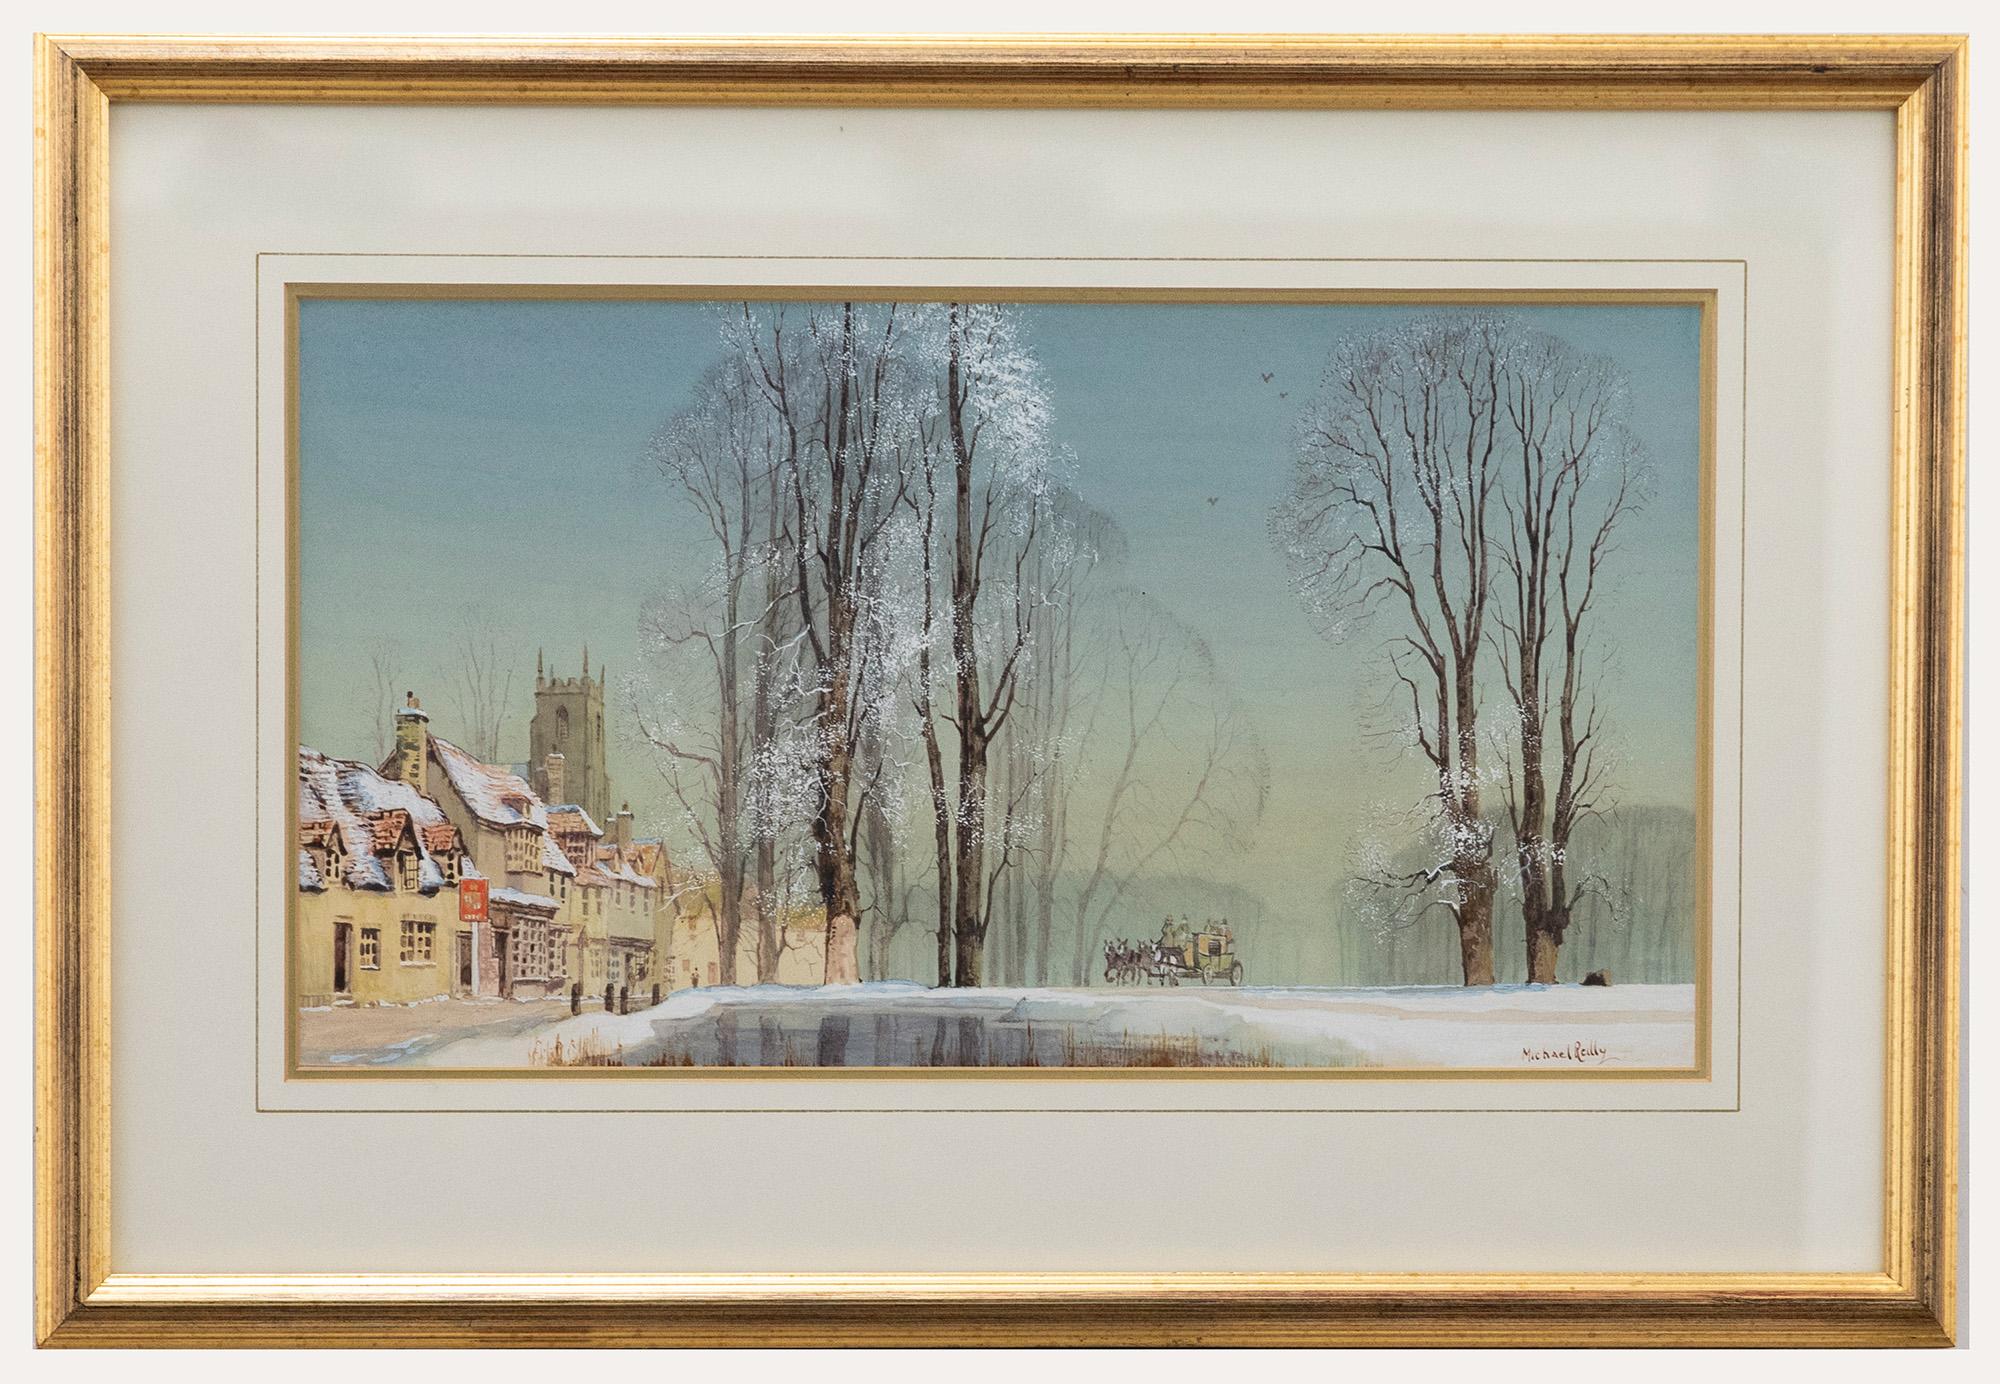 A charming watercolour landscape by Michael Reilly, depicting a driven mail coach arriving at its next stop. The artist has used body colour to carefully depict areas of snow within the winter village scene. Signed by Reilly to the lower right. The